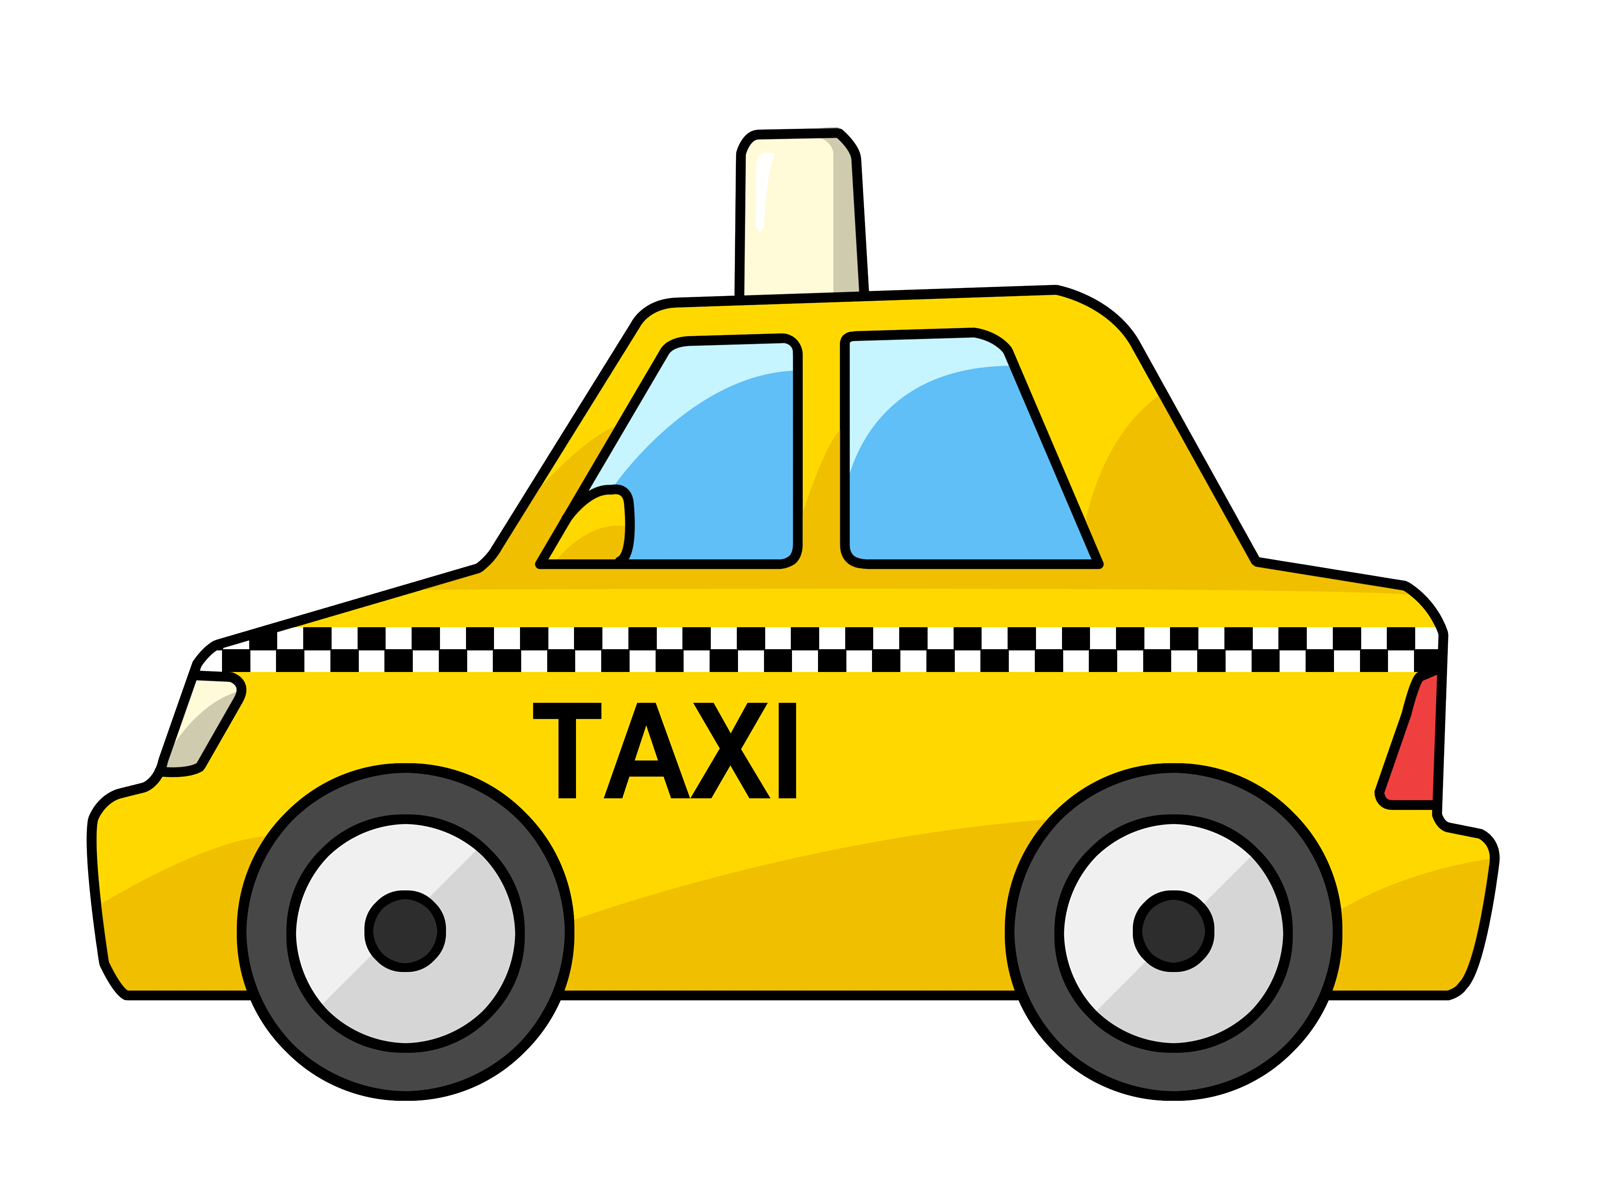 Taxi Clip Art   Images   Free For Commercial Use